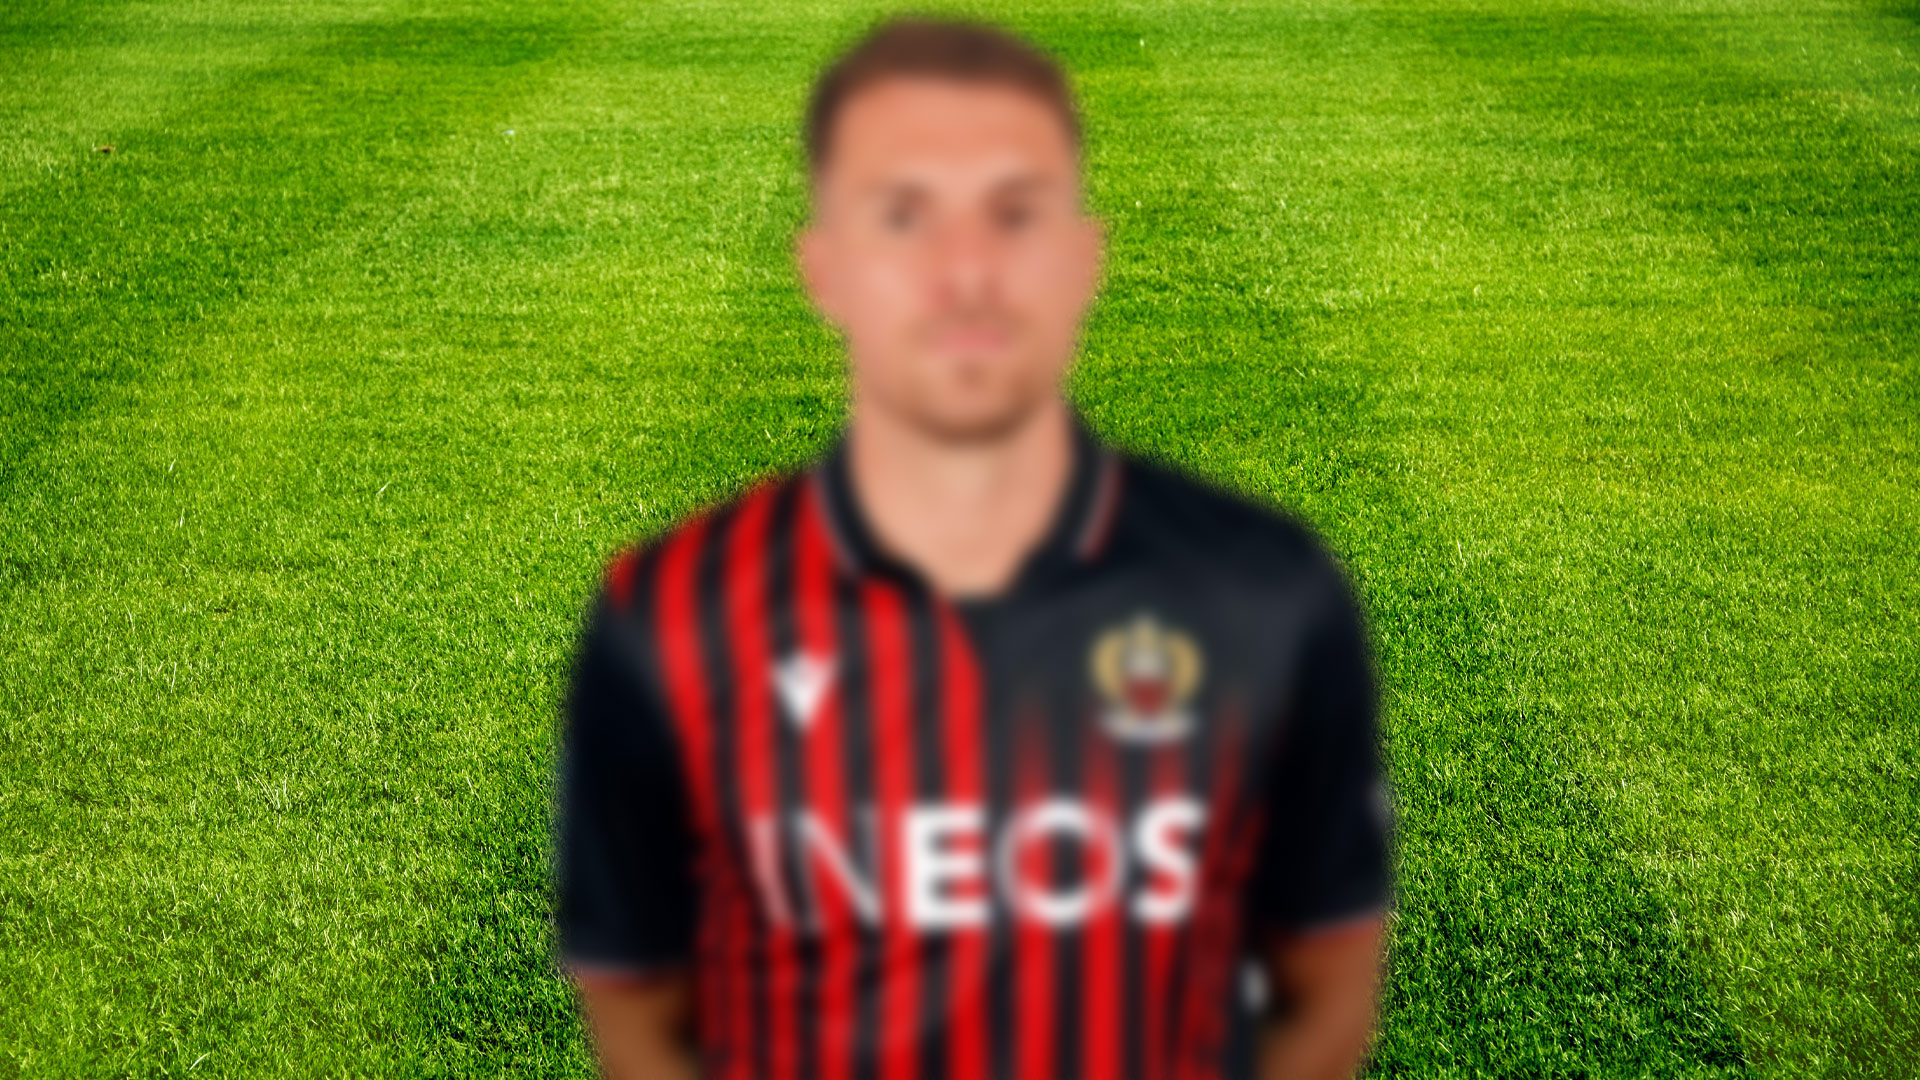 A blurred image of a Nice footballer